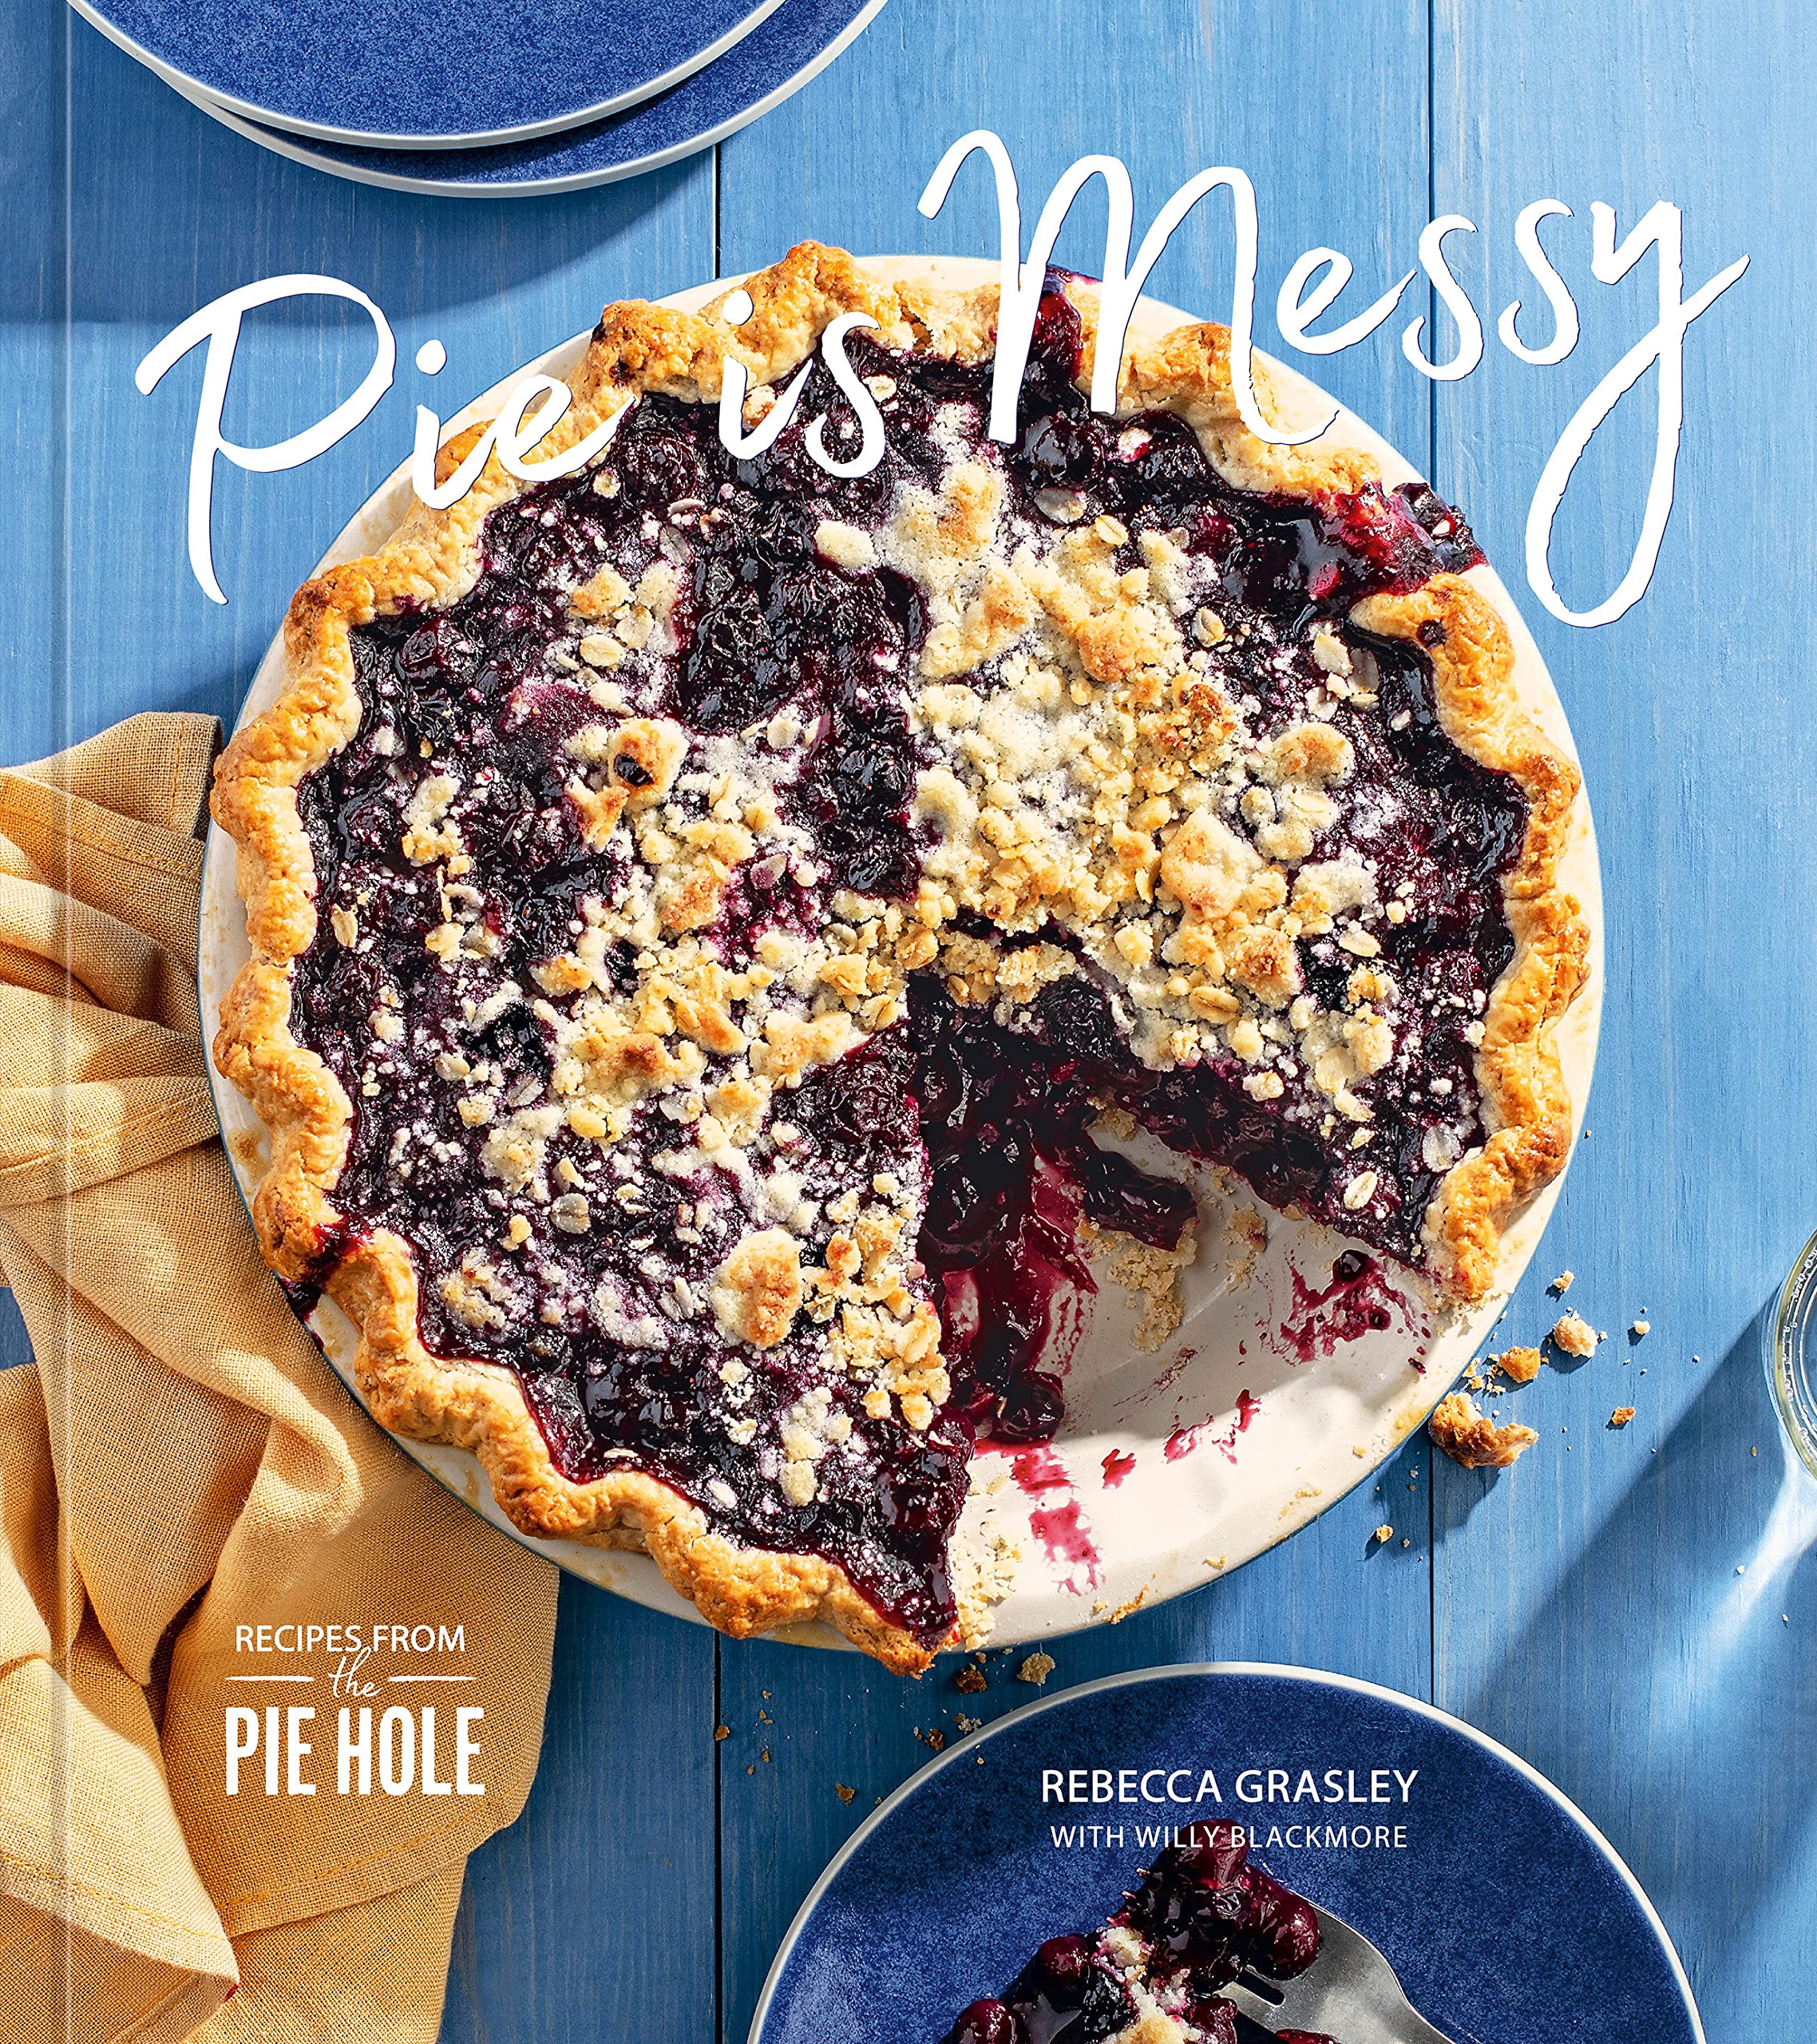 Pie is Messy: Recipes from The Pie Hole (Rebecca Grasley, Willy Blackmore) *Signed*